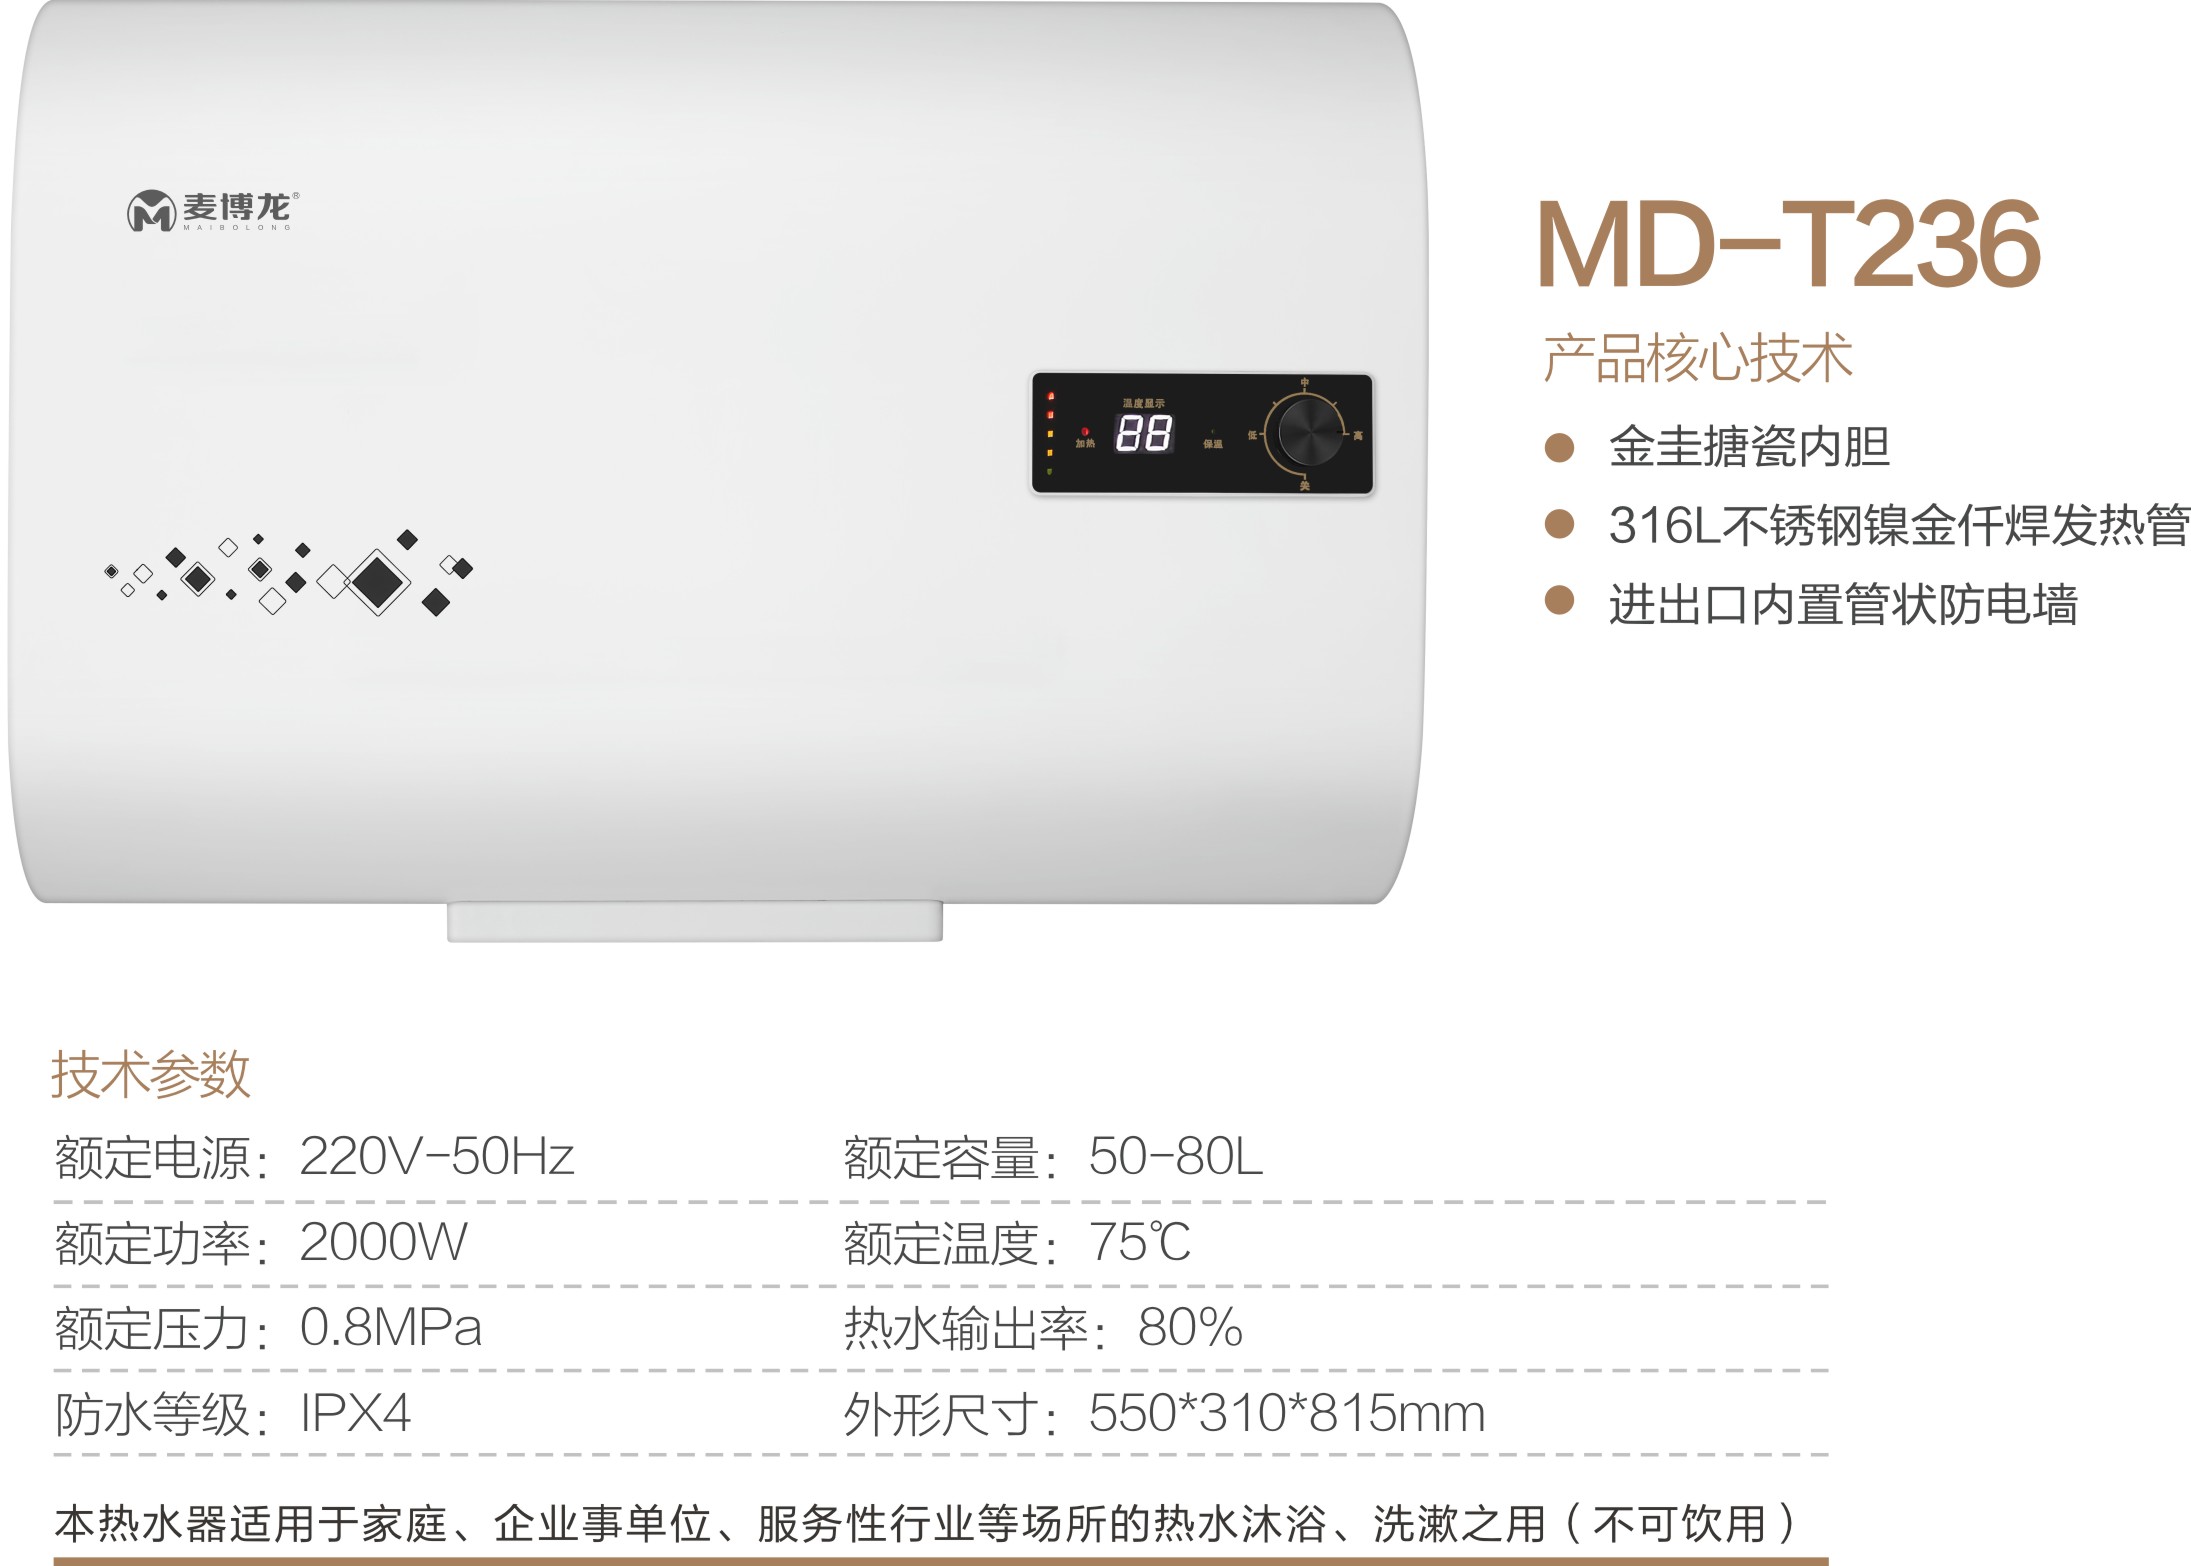 MD-T236